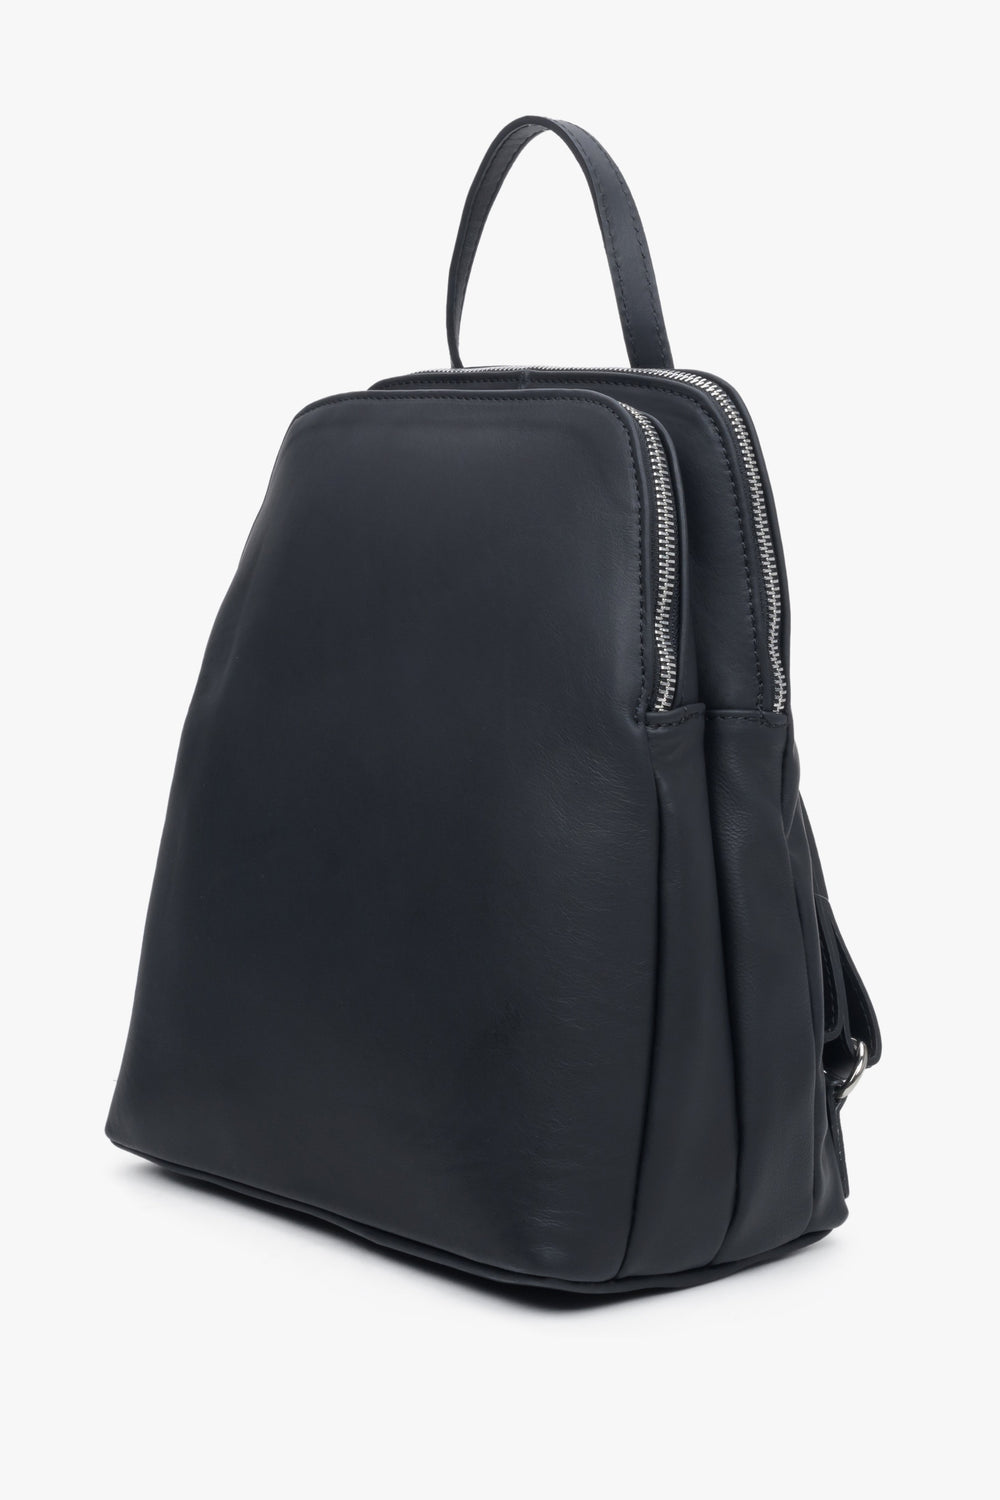 Women's black leather backpack by Estro.